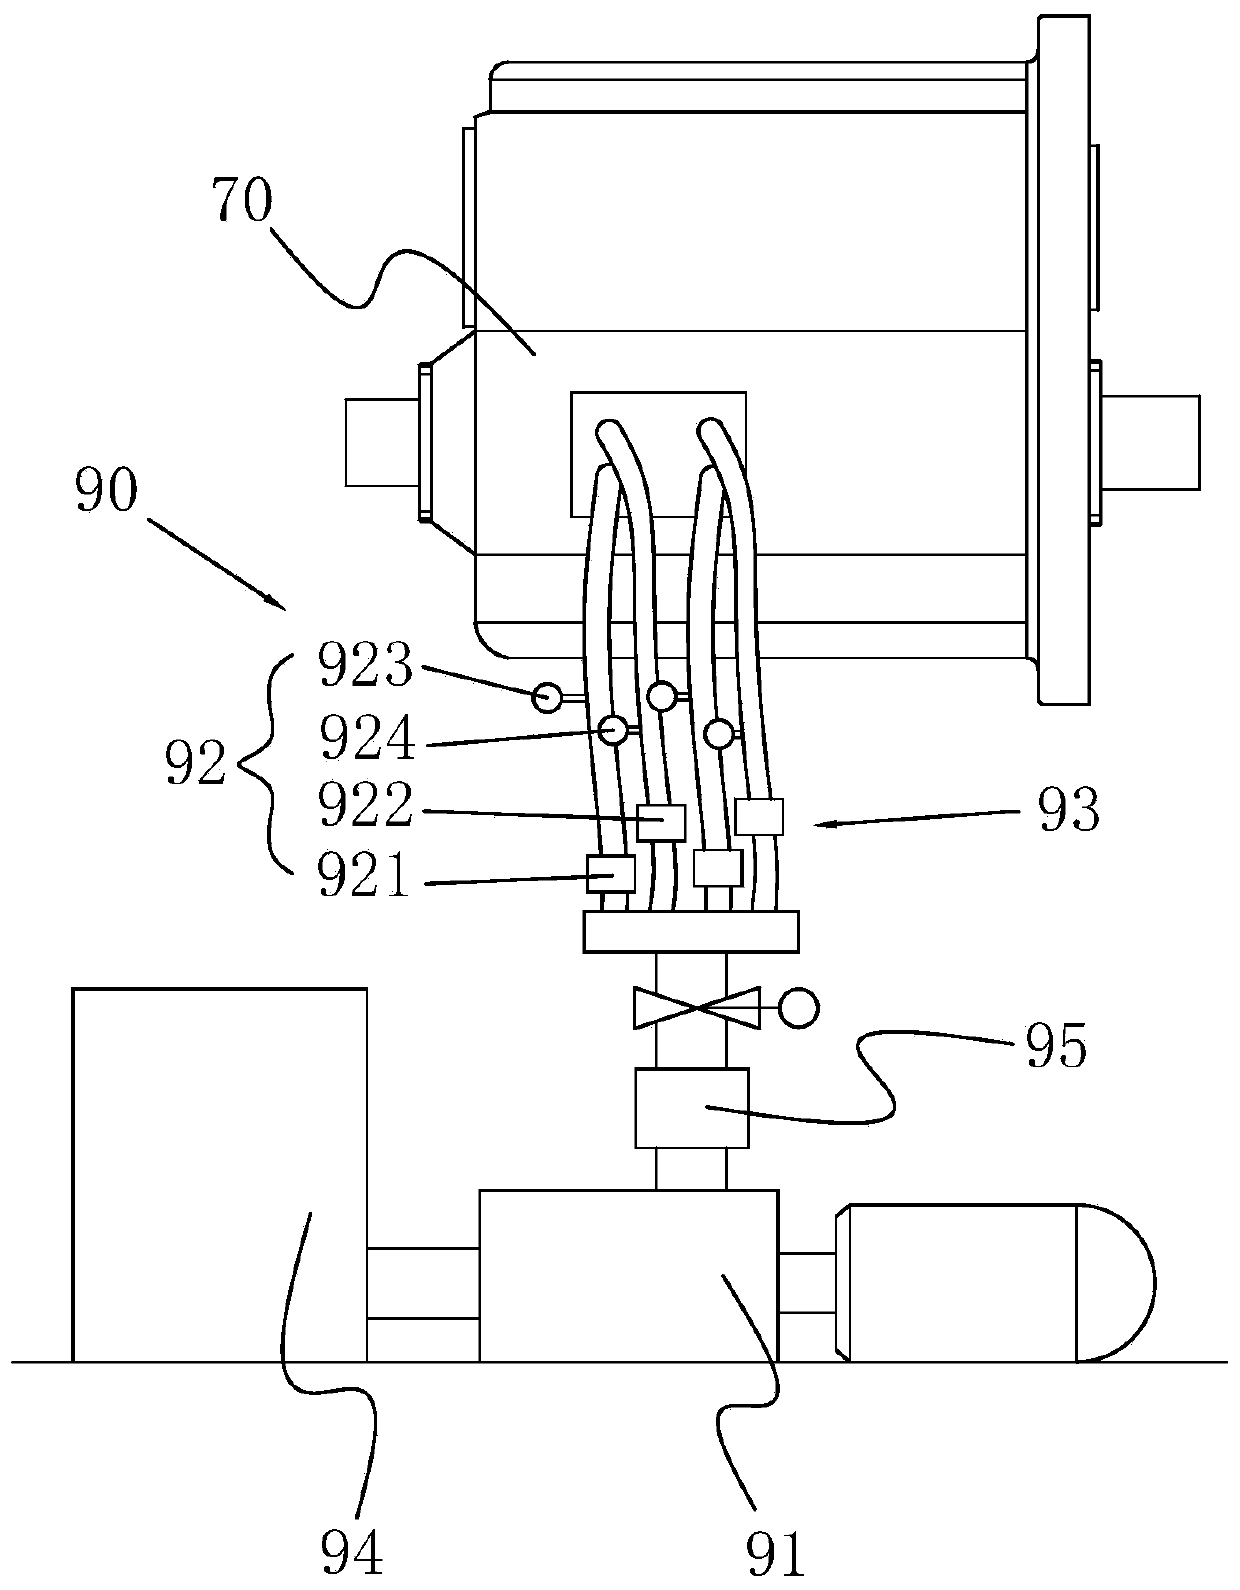 Variable speed control system of four-gear transmission